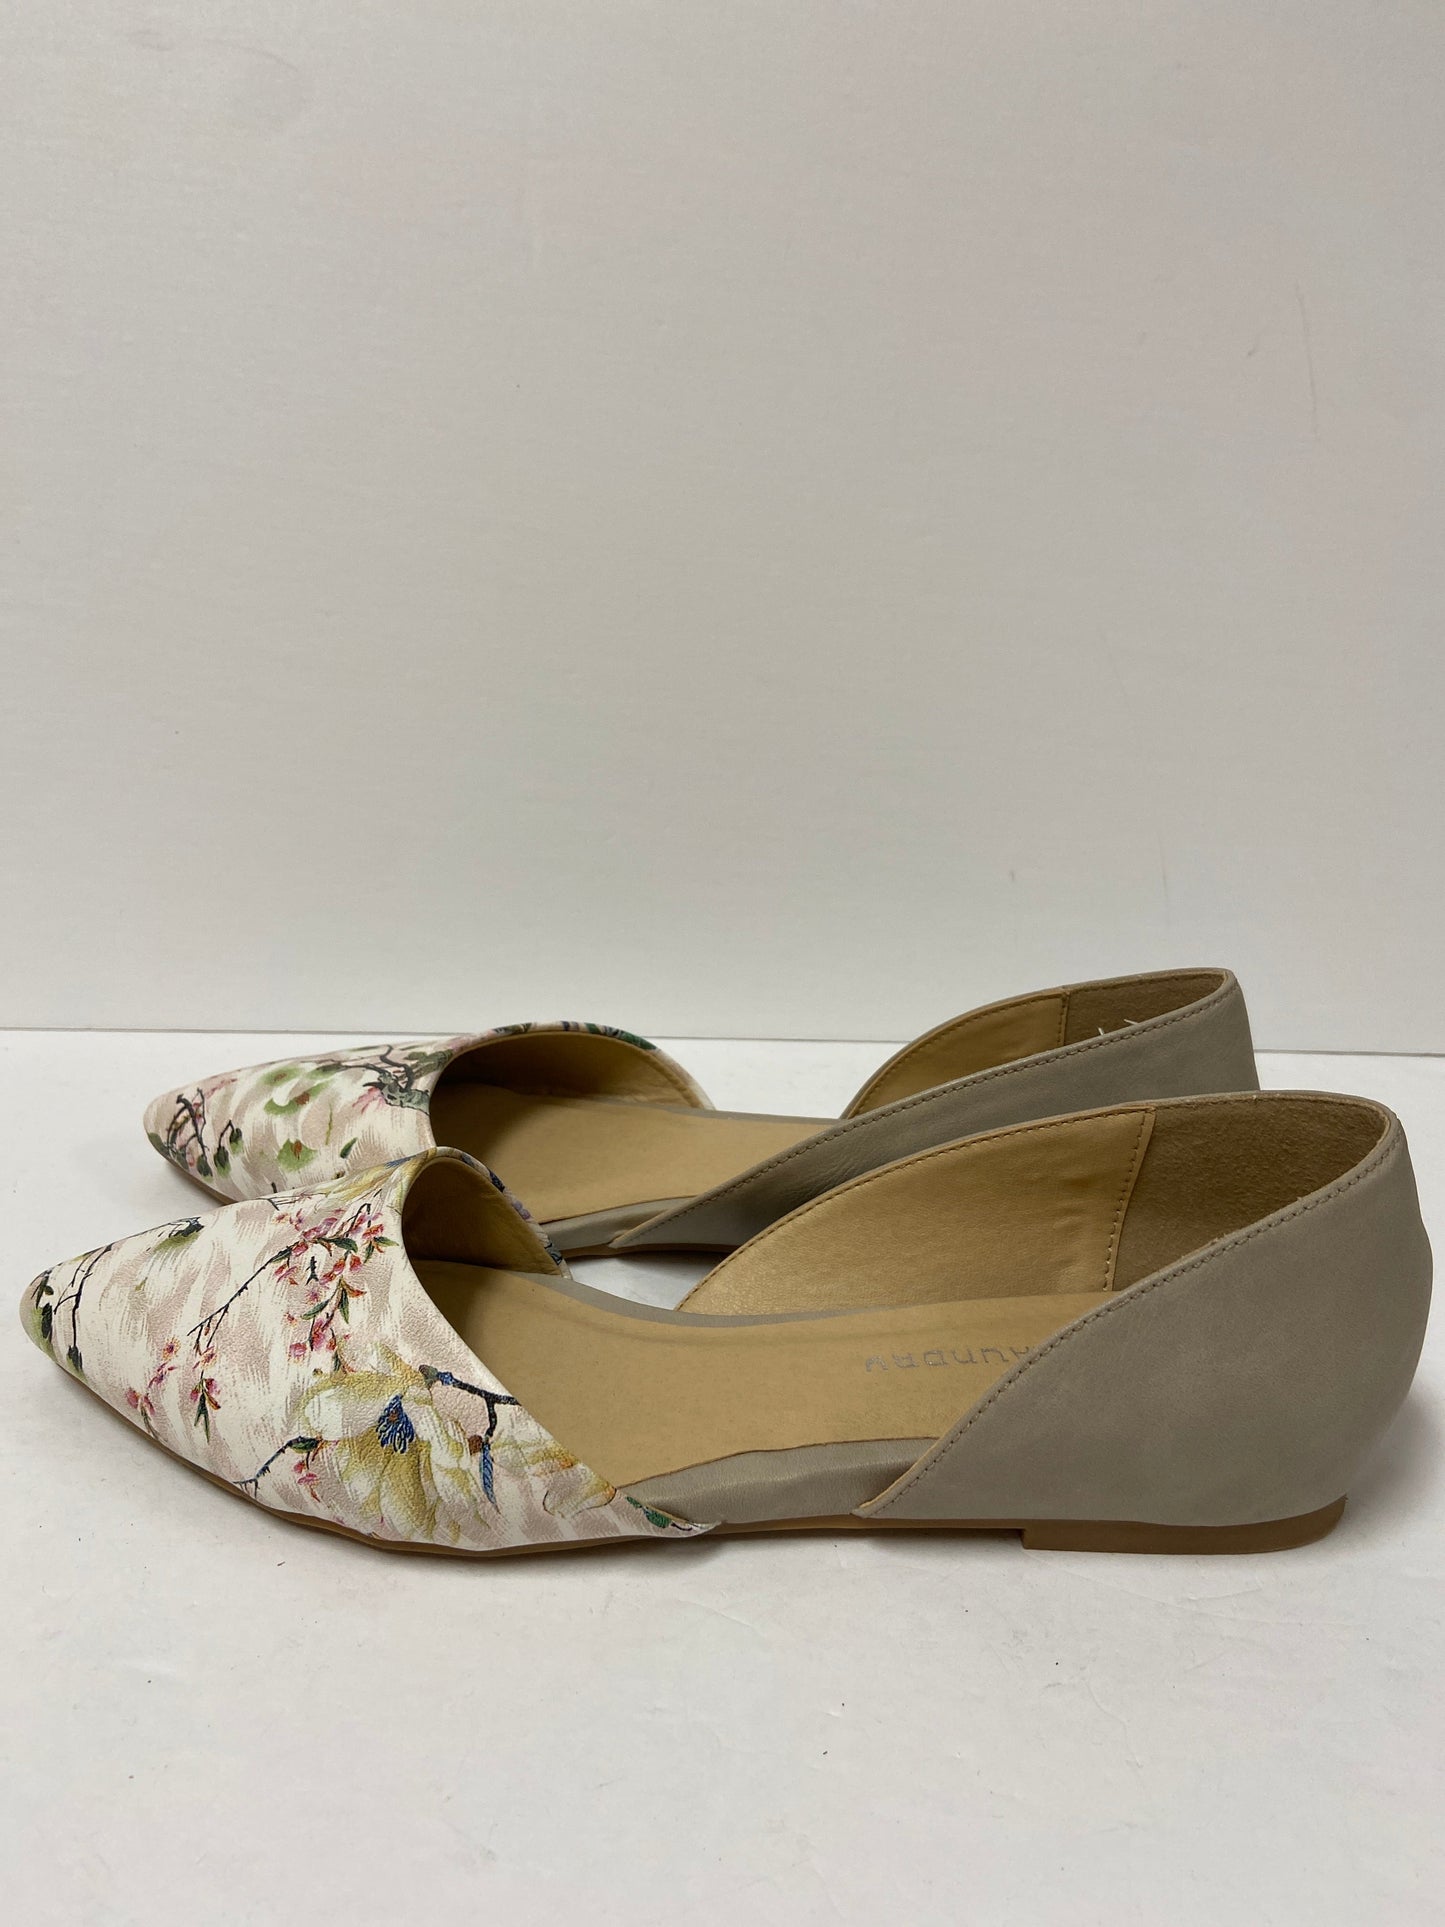 Shoes Flats Ballet By Laundry  Size: 8